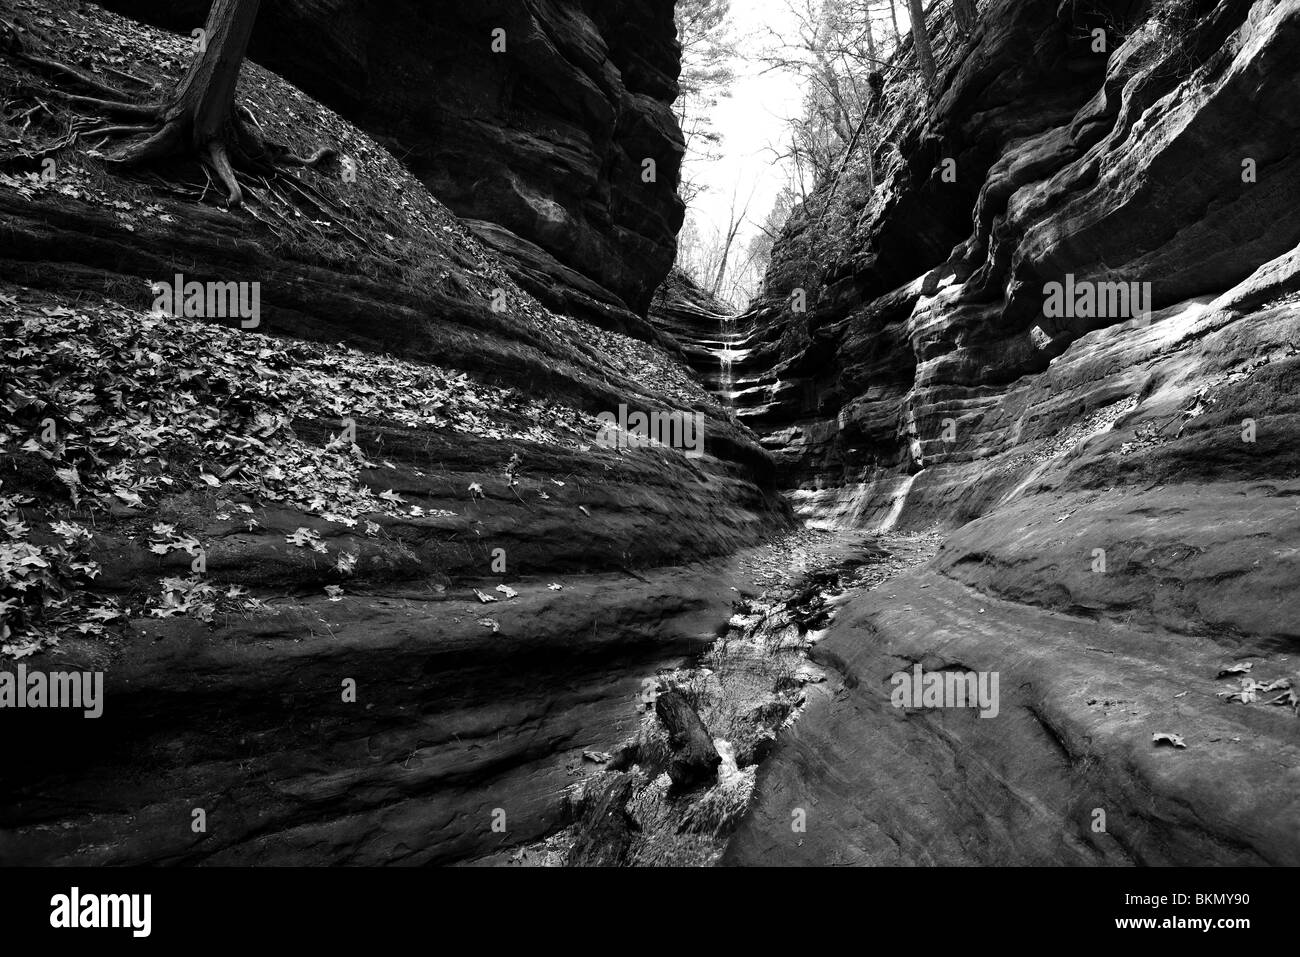 FRENCH CANYON IN STARVED ROCK STATE PARK, LA SALLE COUNTY, ILLINOIS, USA Stock Photo